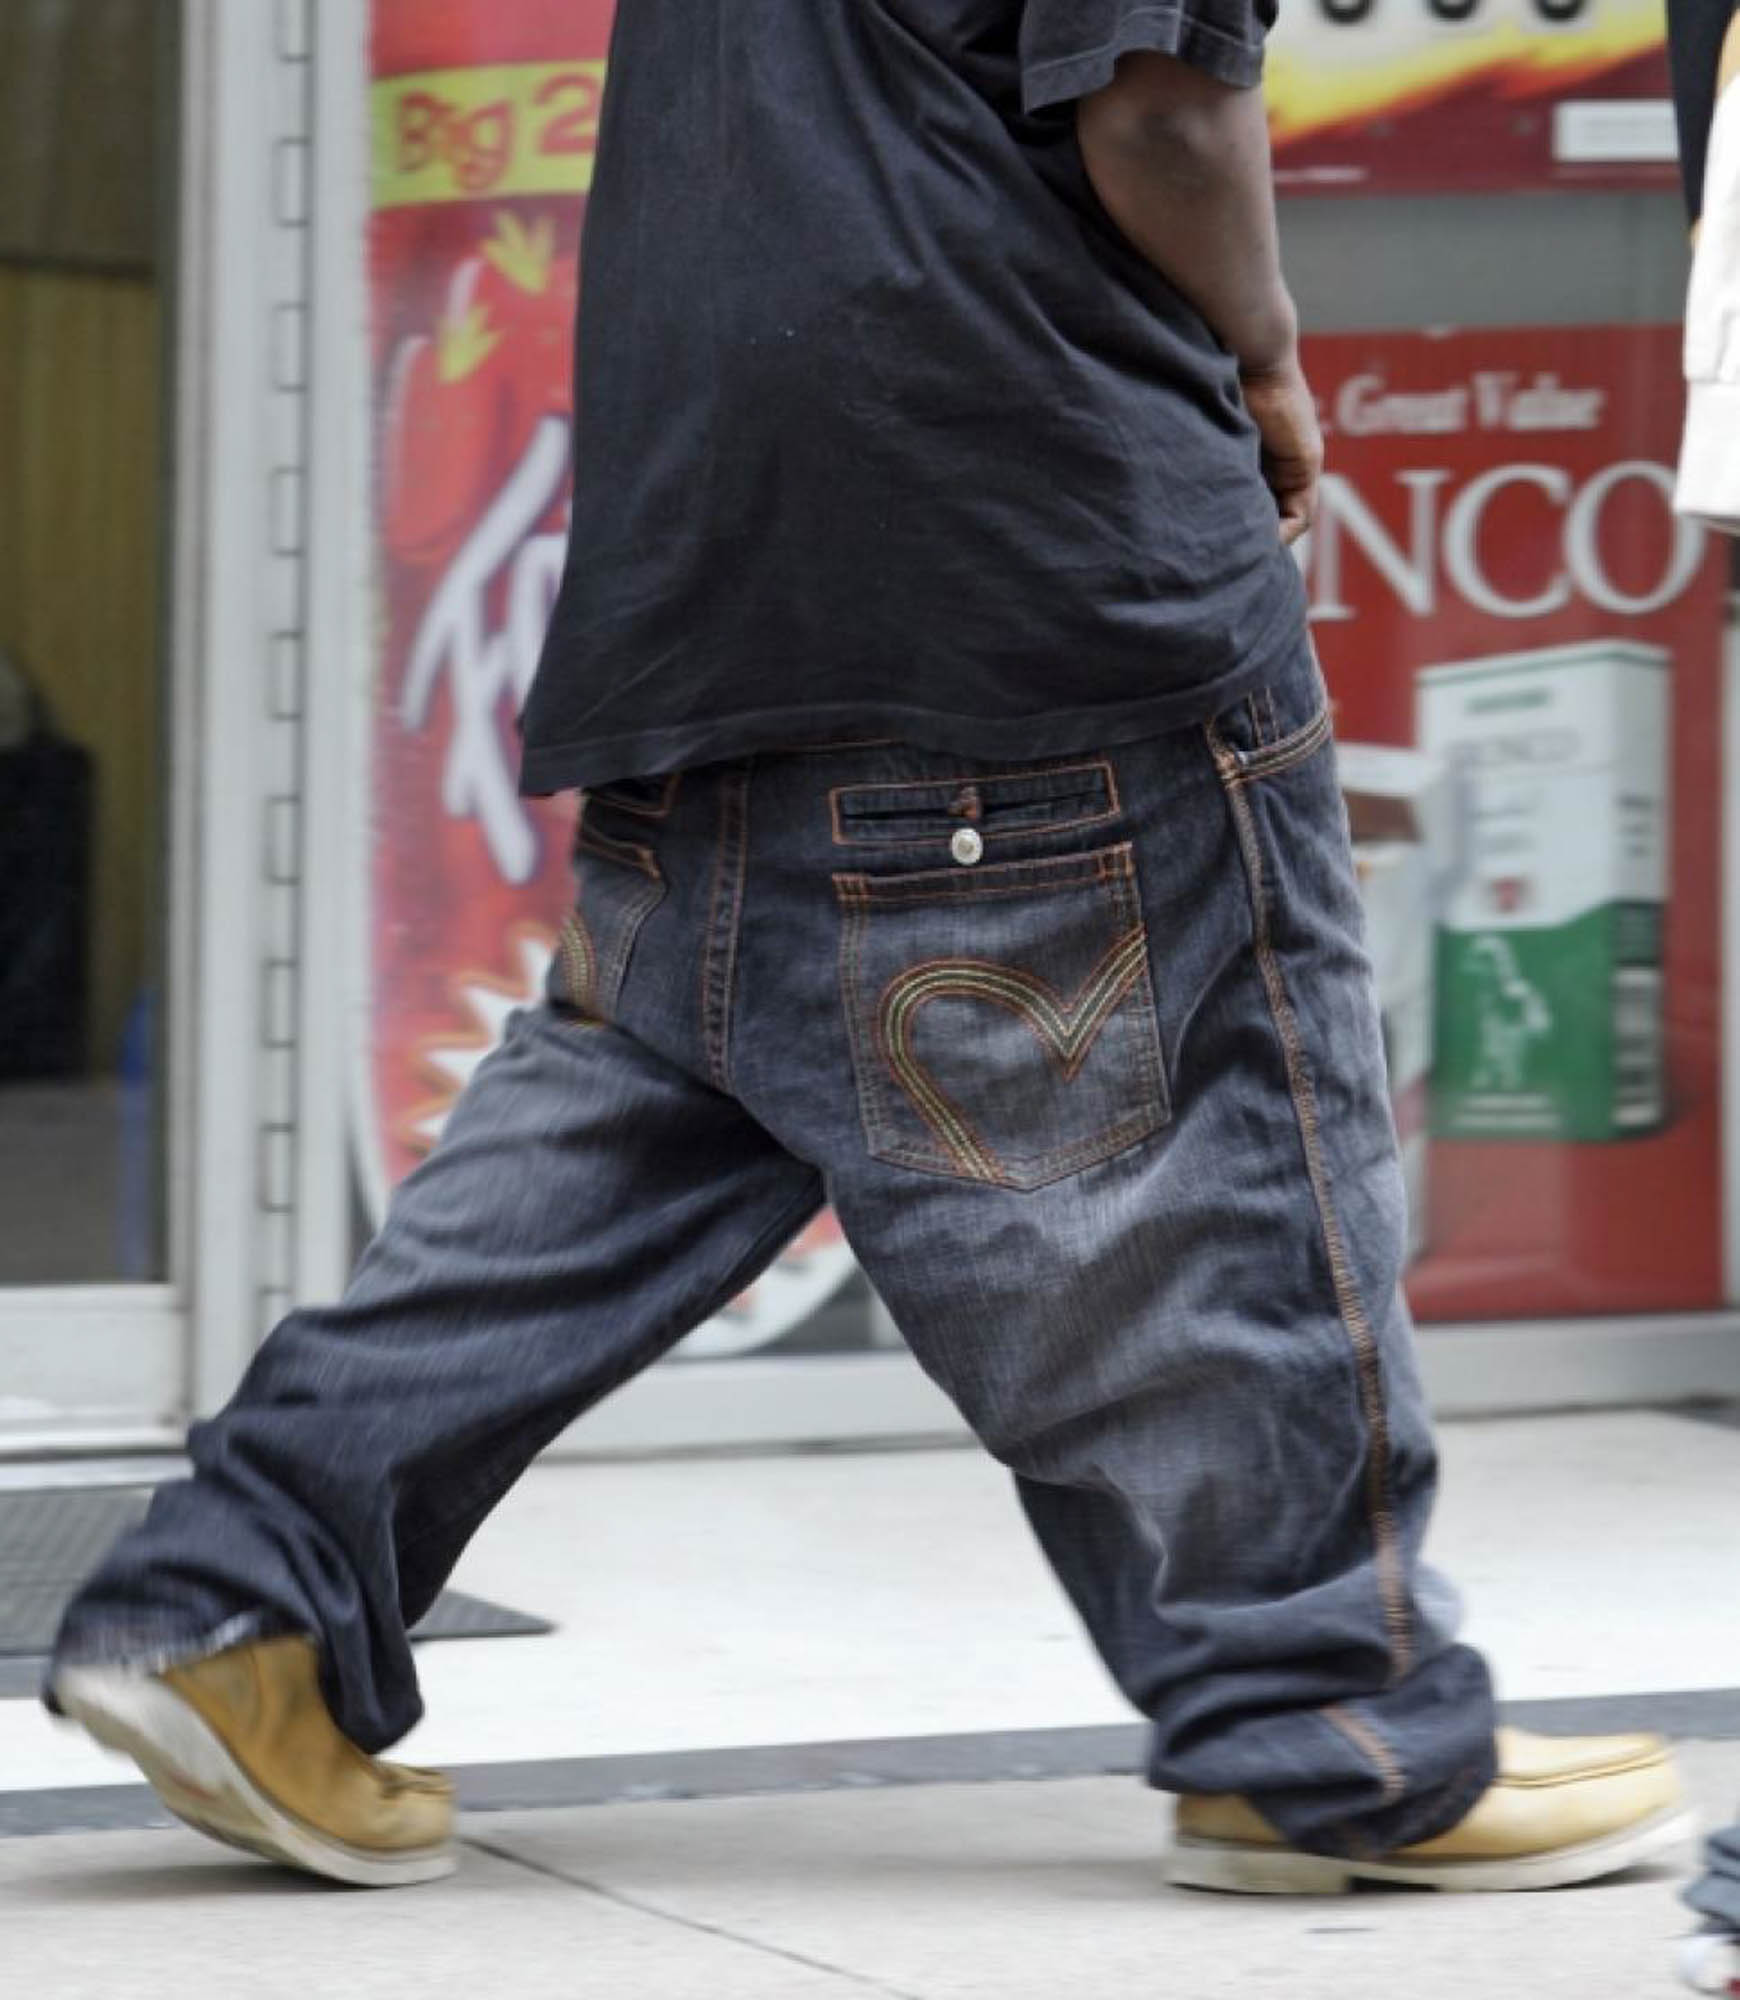 An older man wearing baggy and sagging jeans